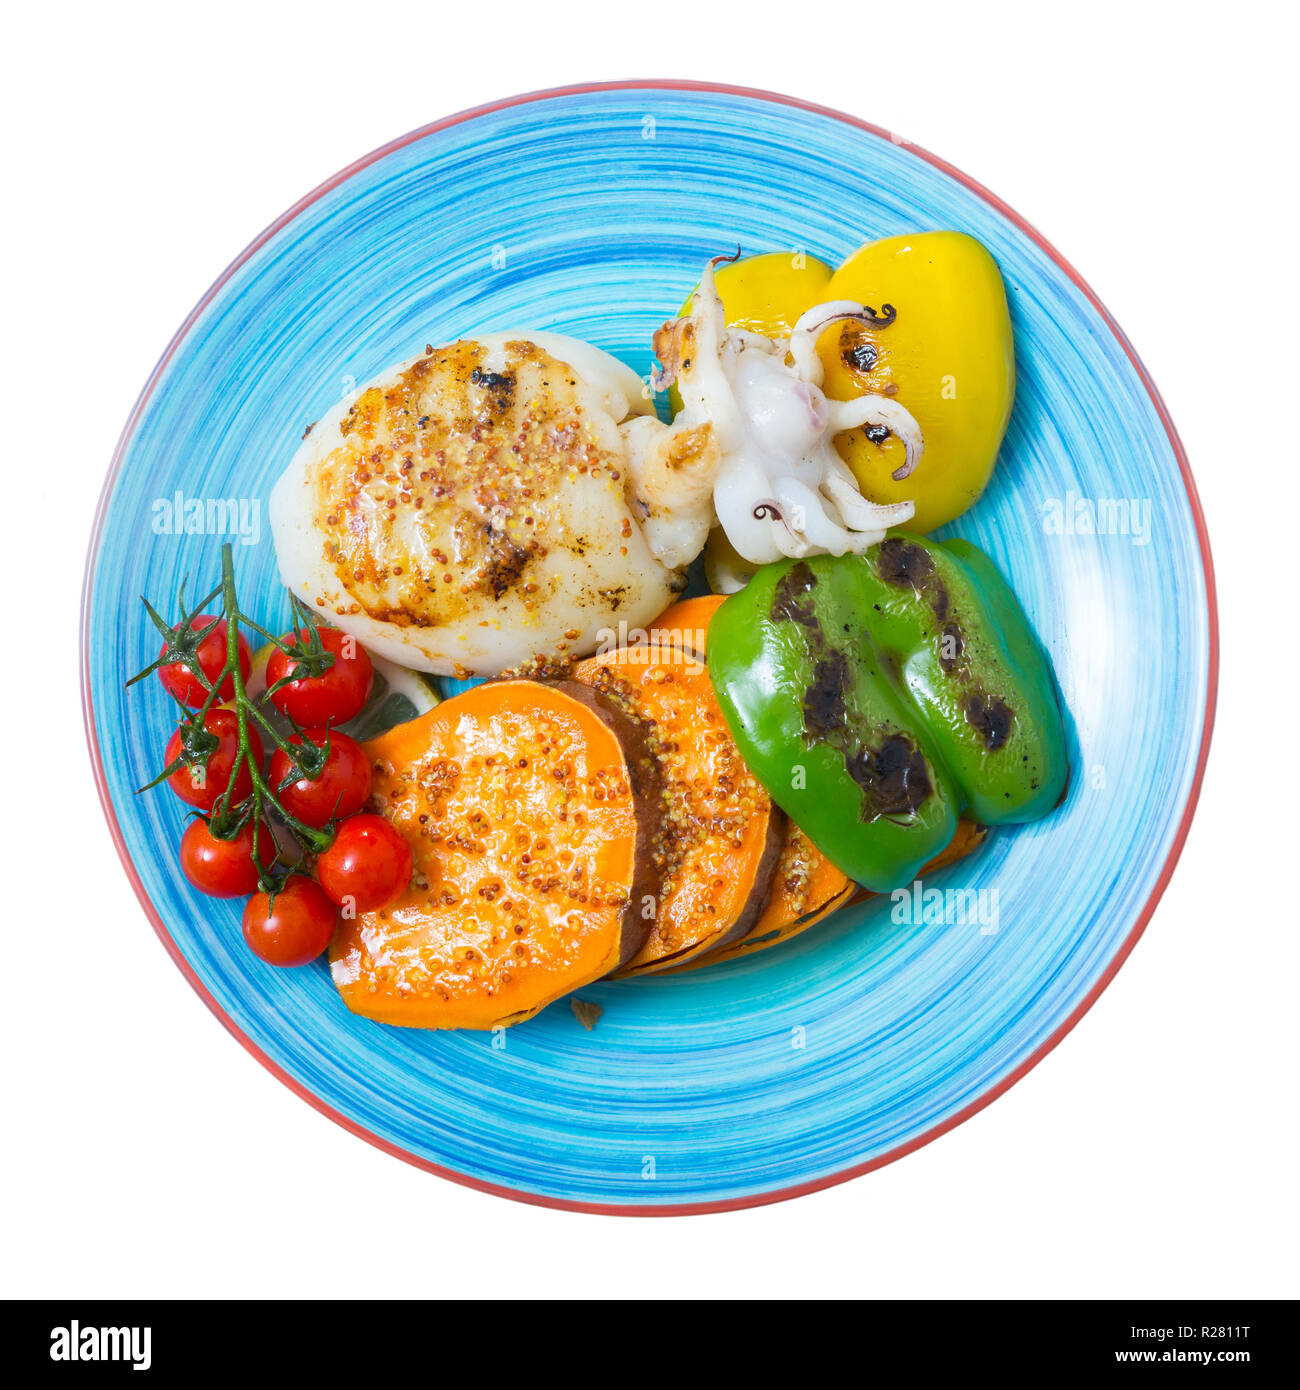 Image of sepia fried on a grill with pepper, boiled batat and honey-mustard  sauce on the plate. Isolated over white background Stock Photo - Alamy